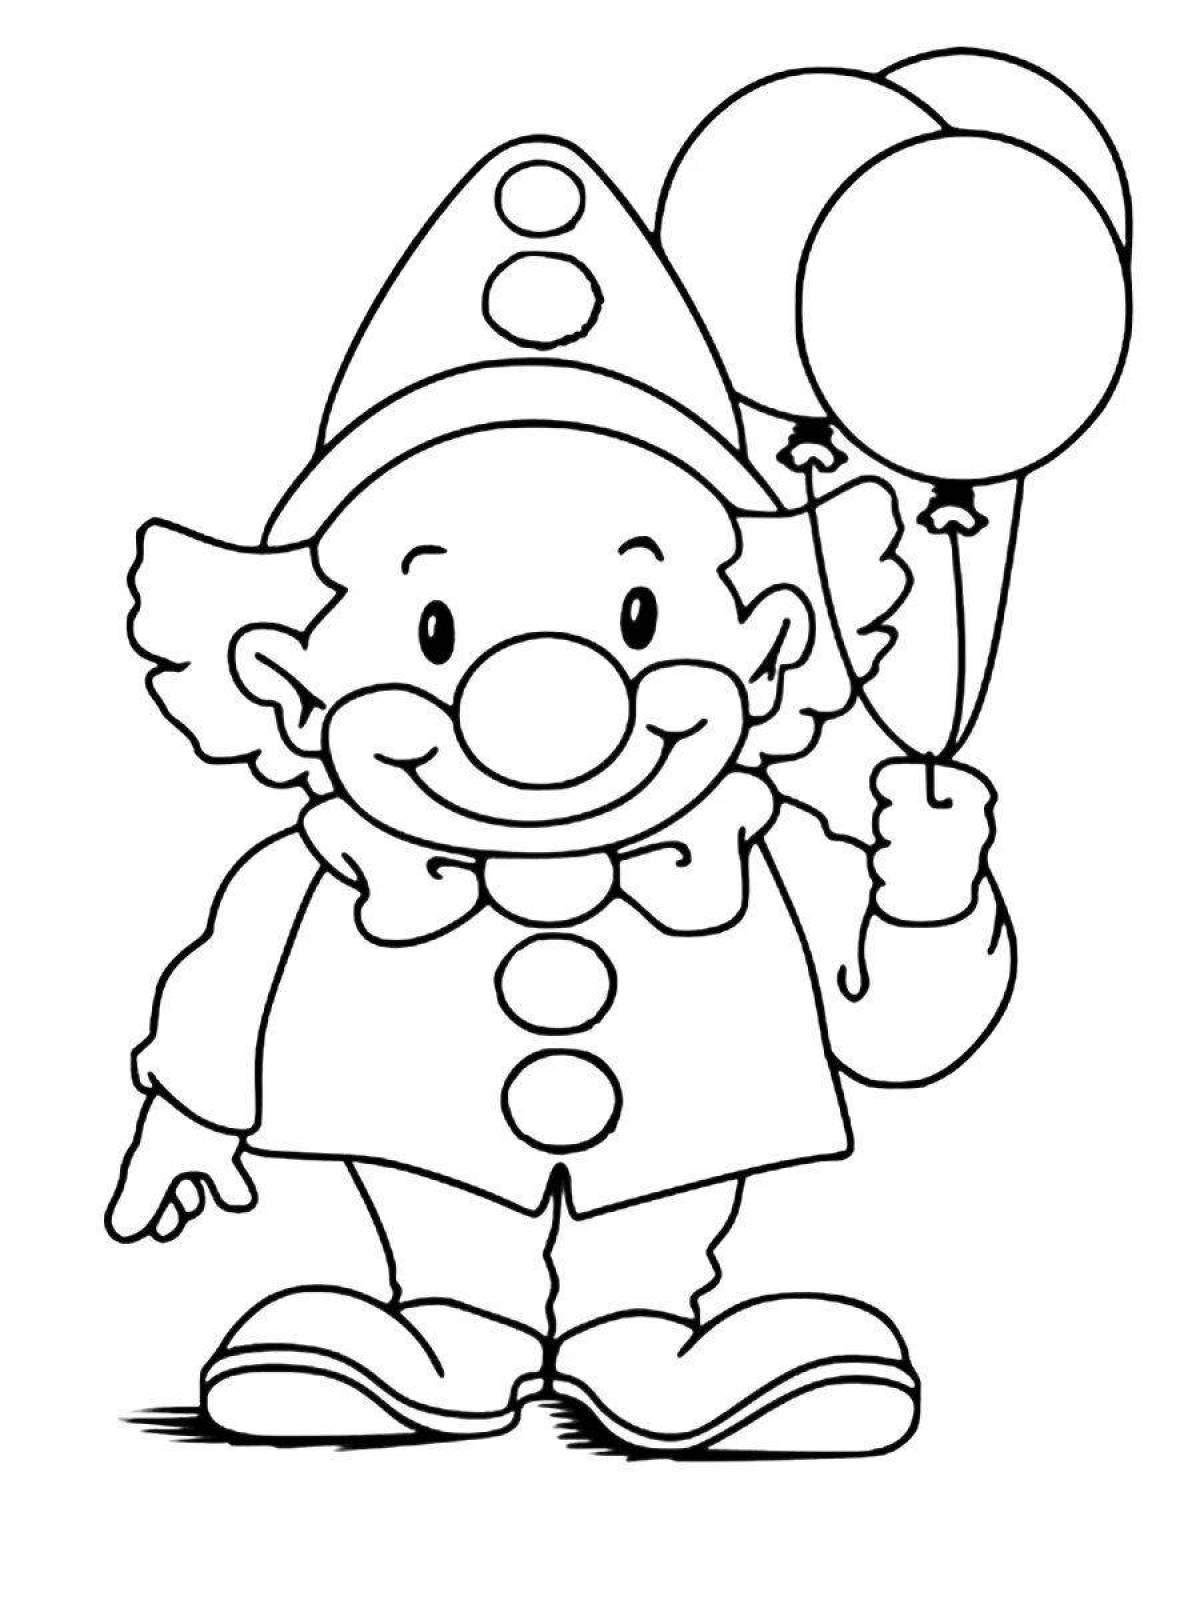 Grinning clown with balloons